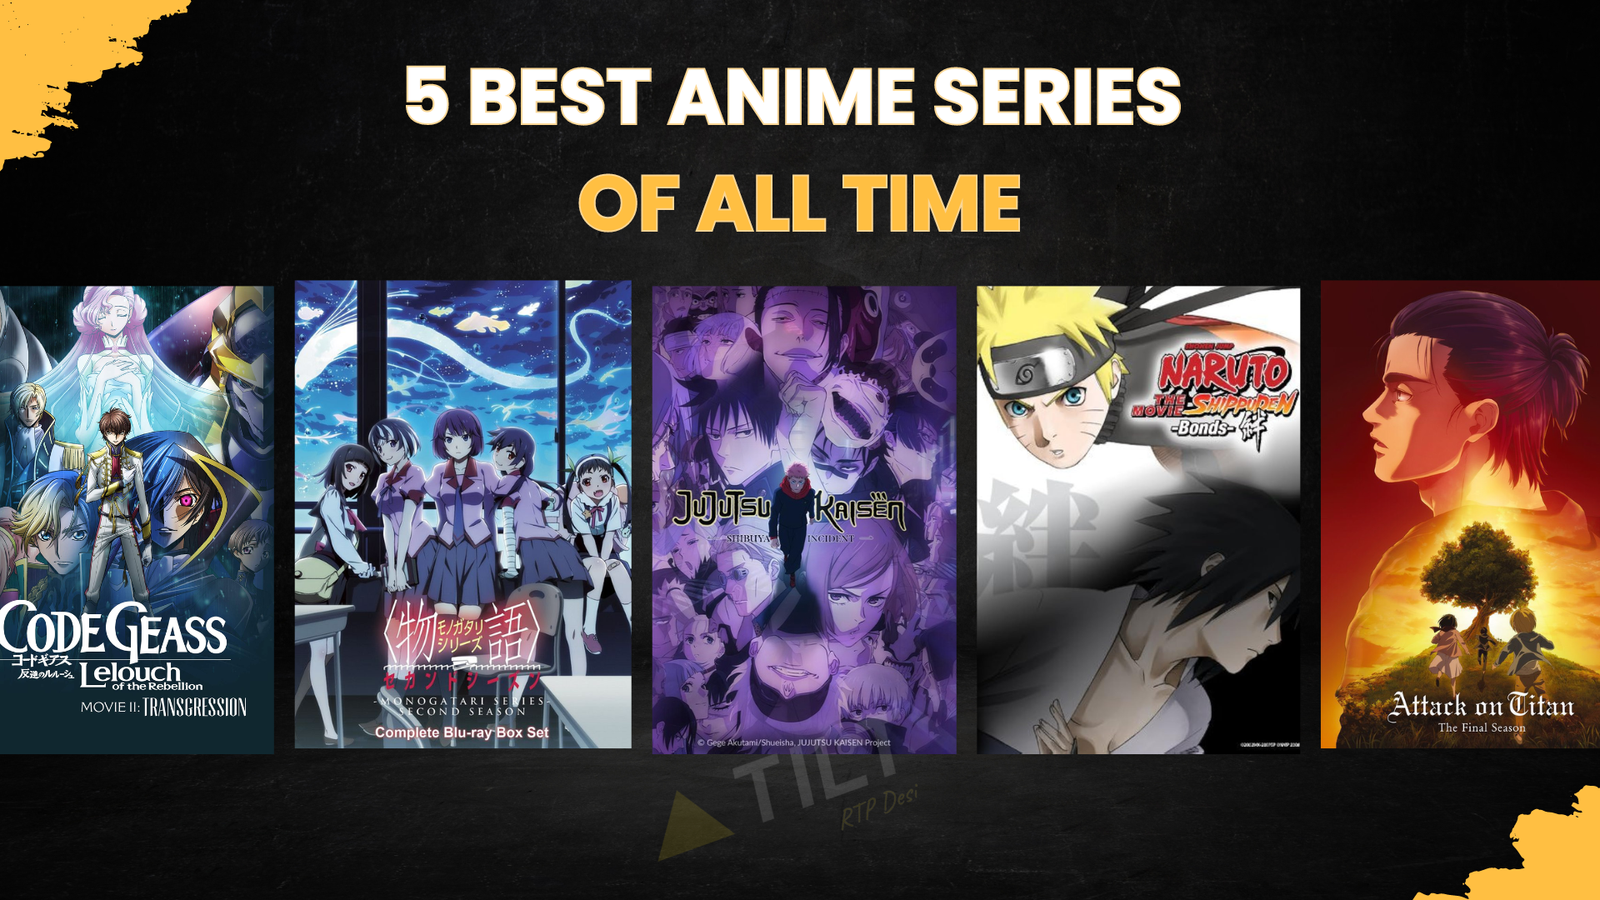 5 Best Anime Series of All Time -Triangle tilt